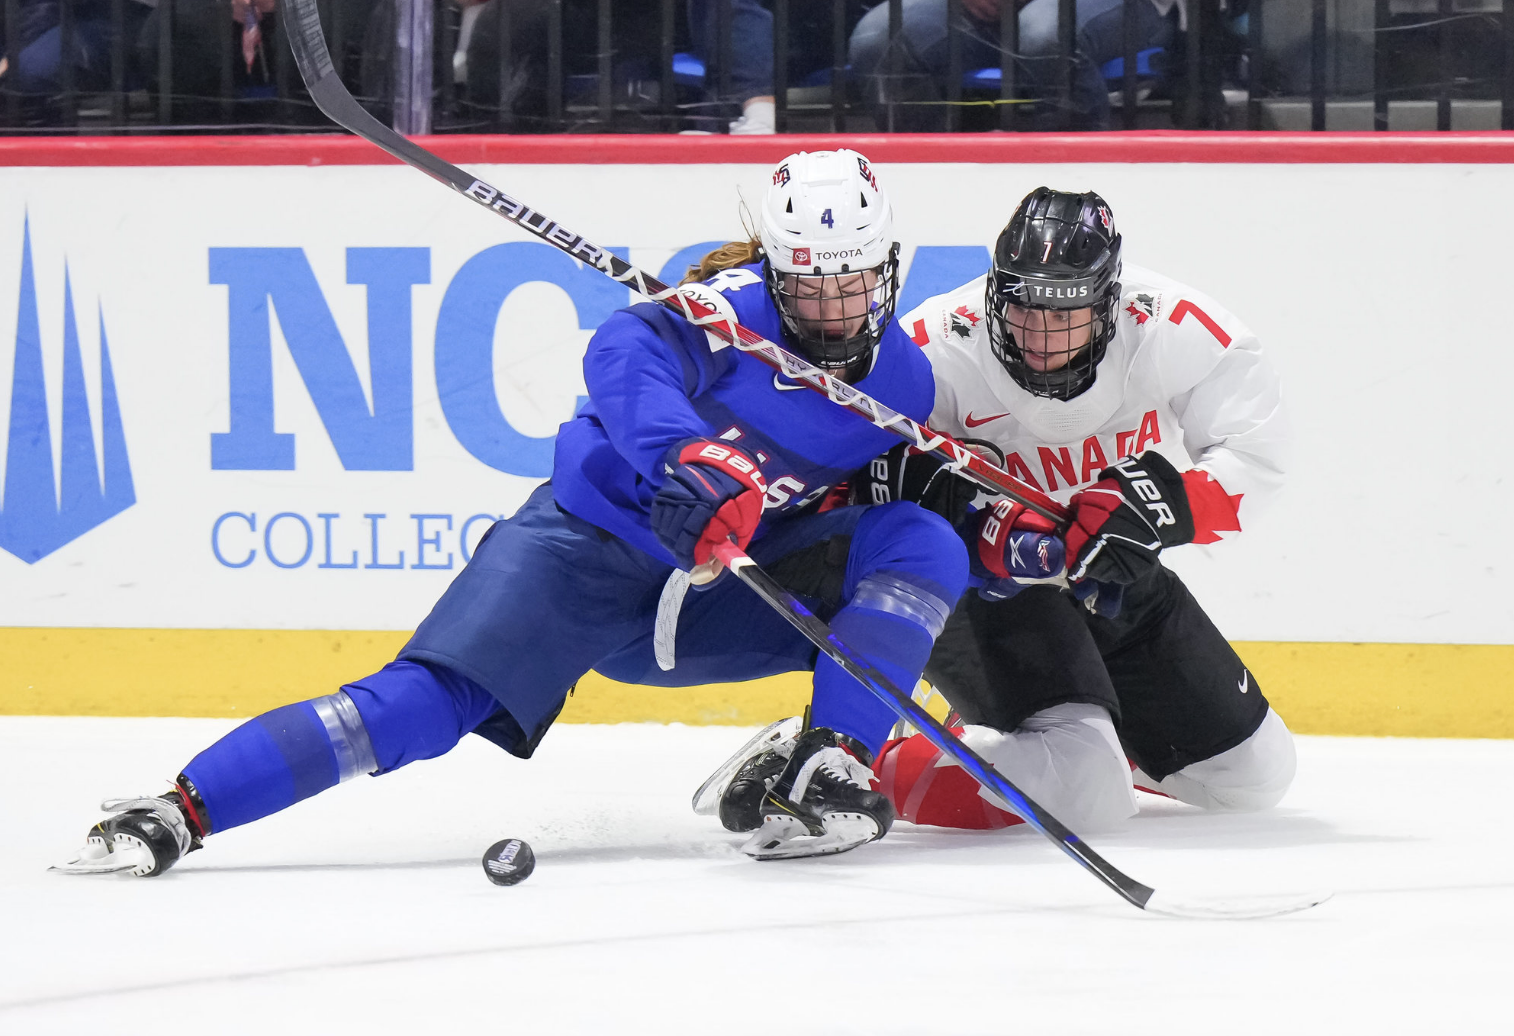 Harvey (left) and Stacey (right) battle over the puck. Stacey is on her kness, while Harvey has nearly fallen to hers as well. The puck sits in front of Harvey as Stacey reaches for it. Harvey is in blue, while Stacey is in white.